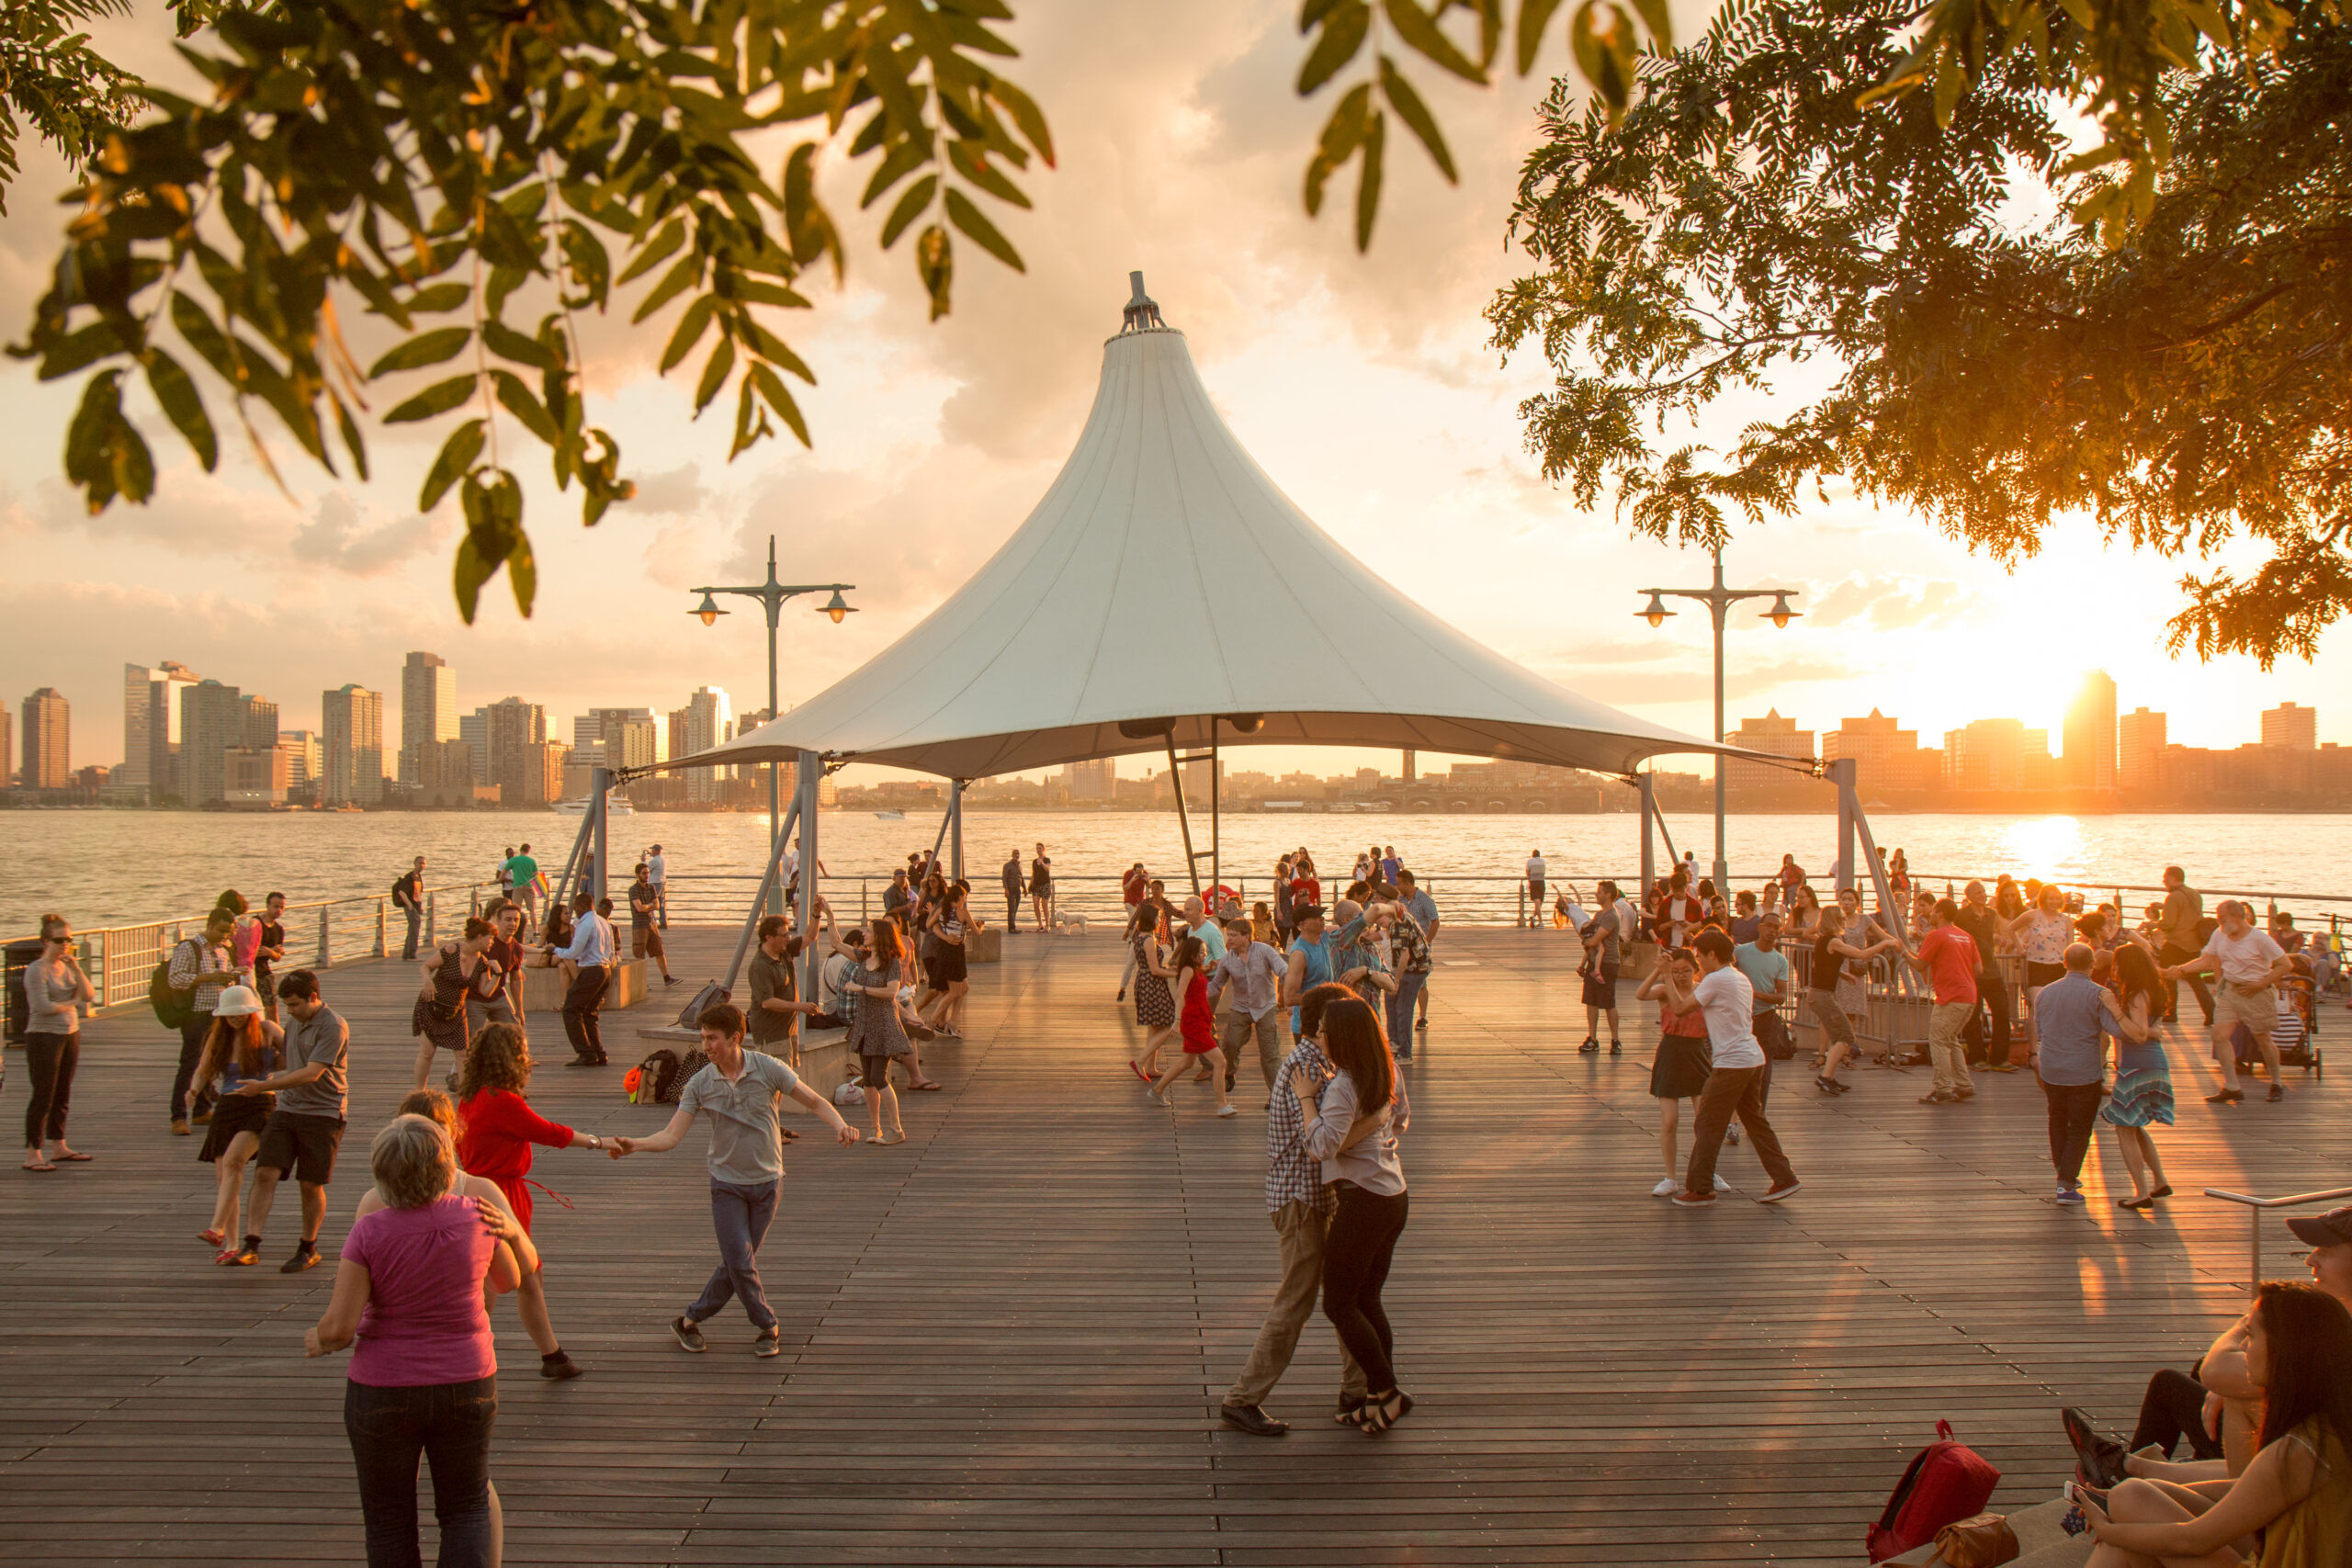 Sunset Salsa participants partner up and dance around under the canopy at sunset on Hudson River Park's Pier 45